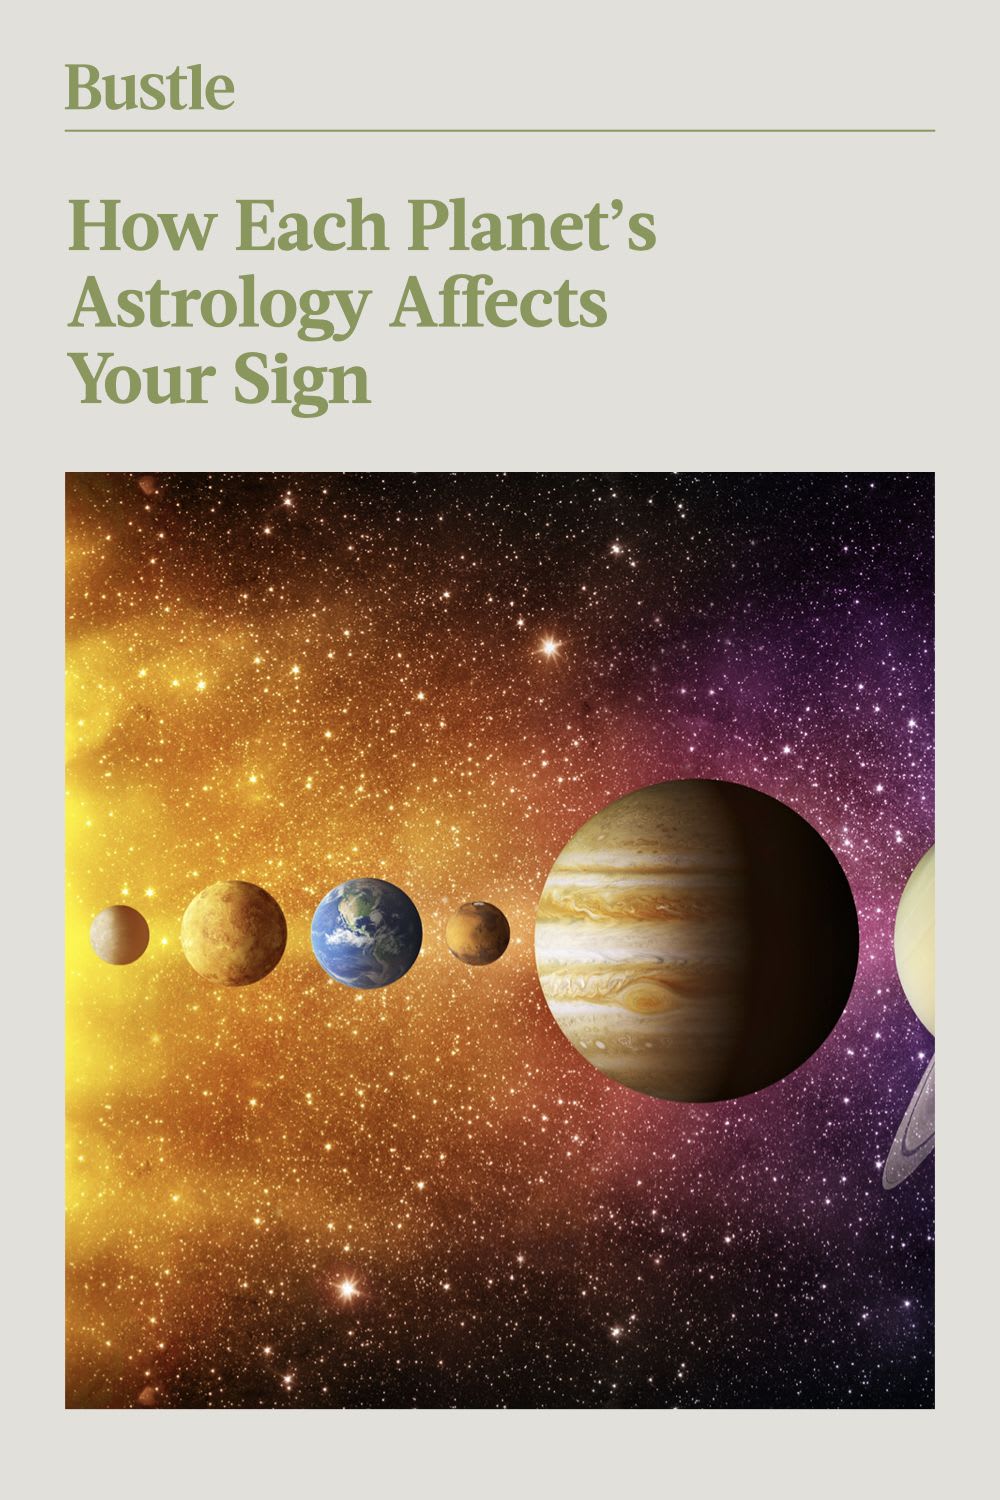 Your Guide To The Planets In Astrology & How They Affect You | Astrology, Major planets, List of planets